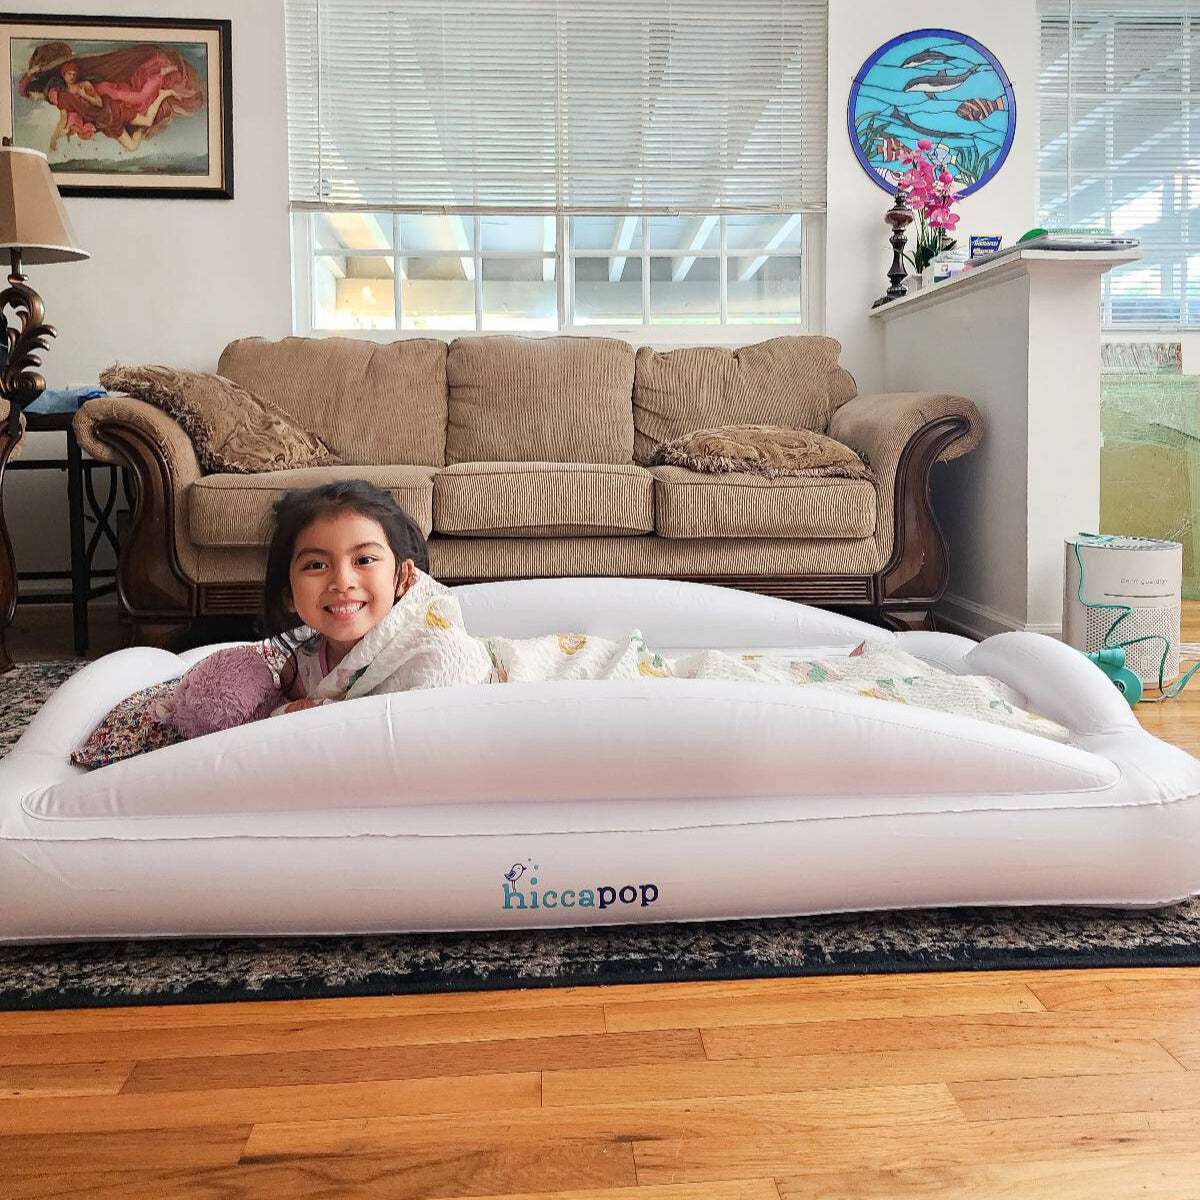 travel bed guard inflatable